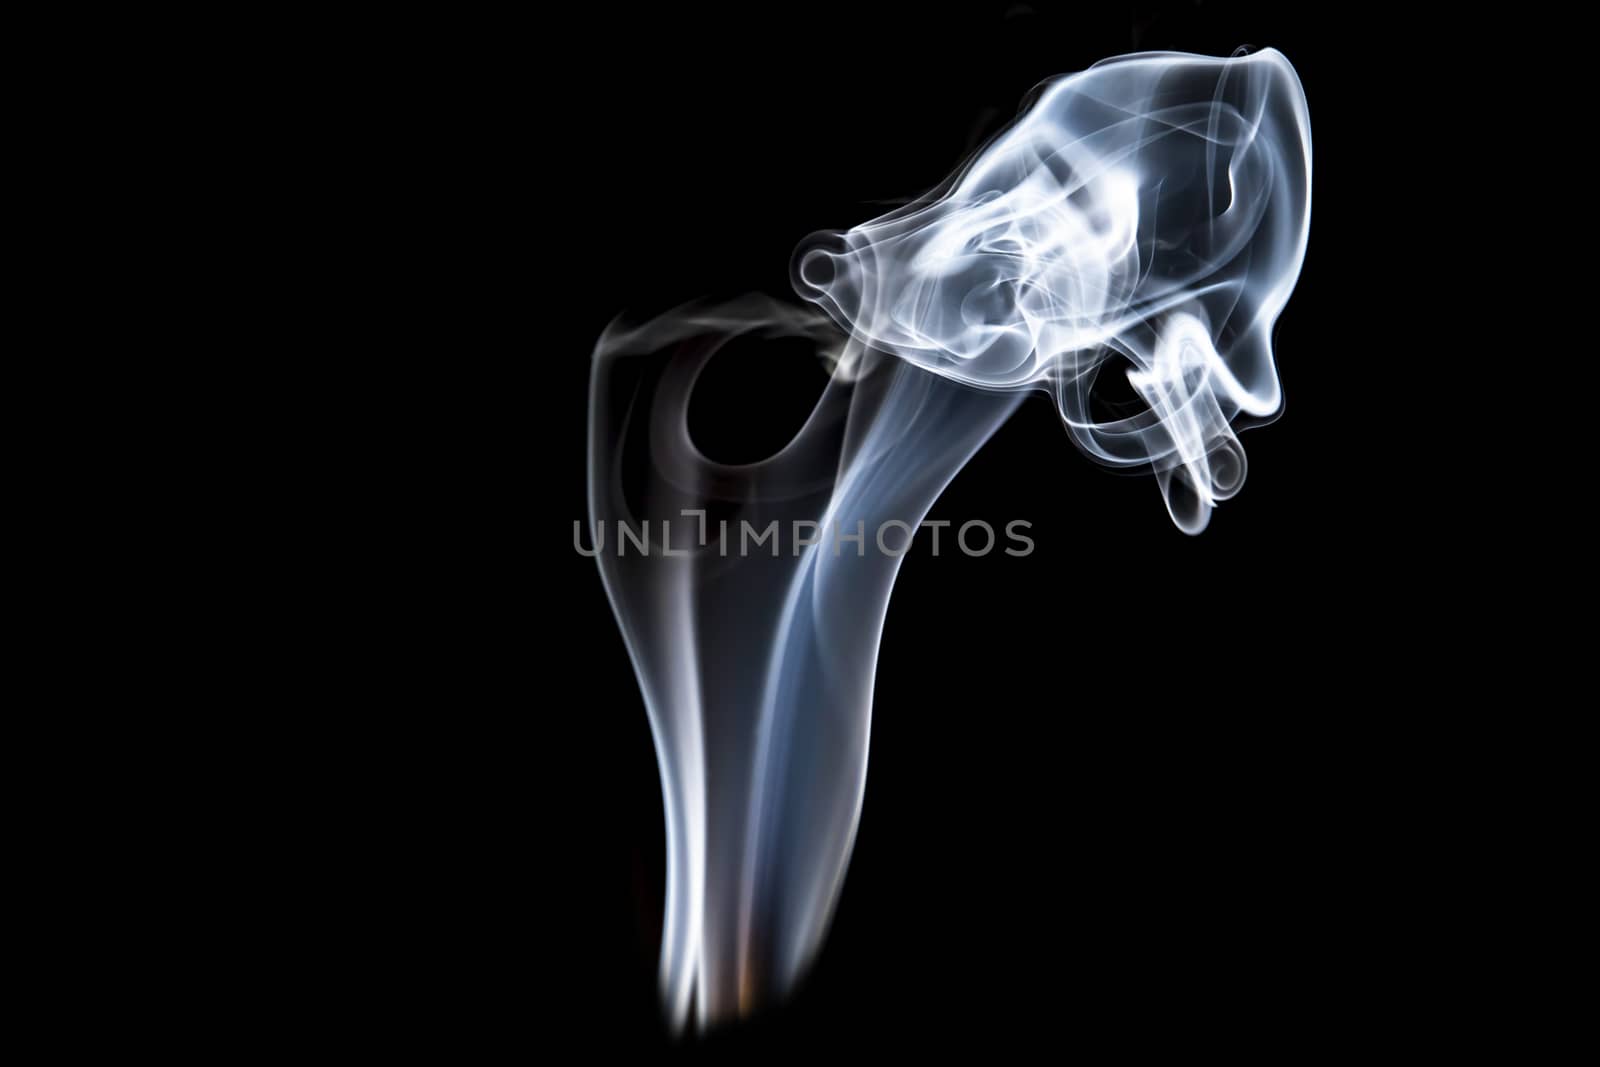 smoke with lights on black background by Chattranusorn09